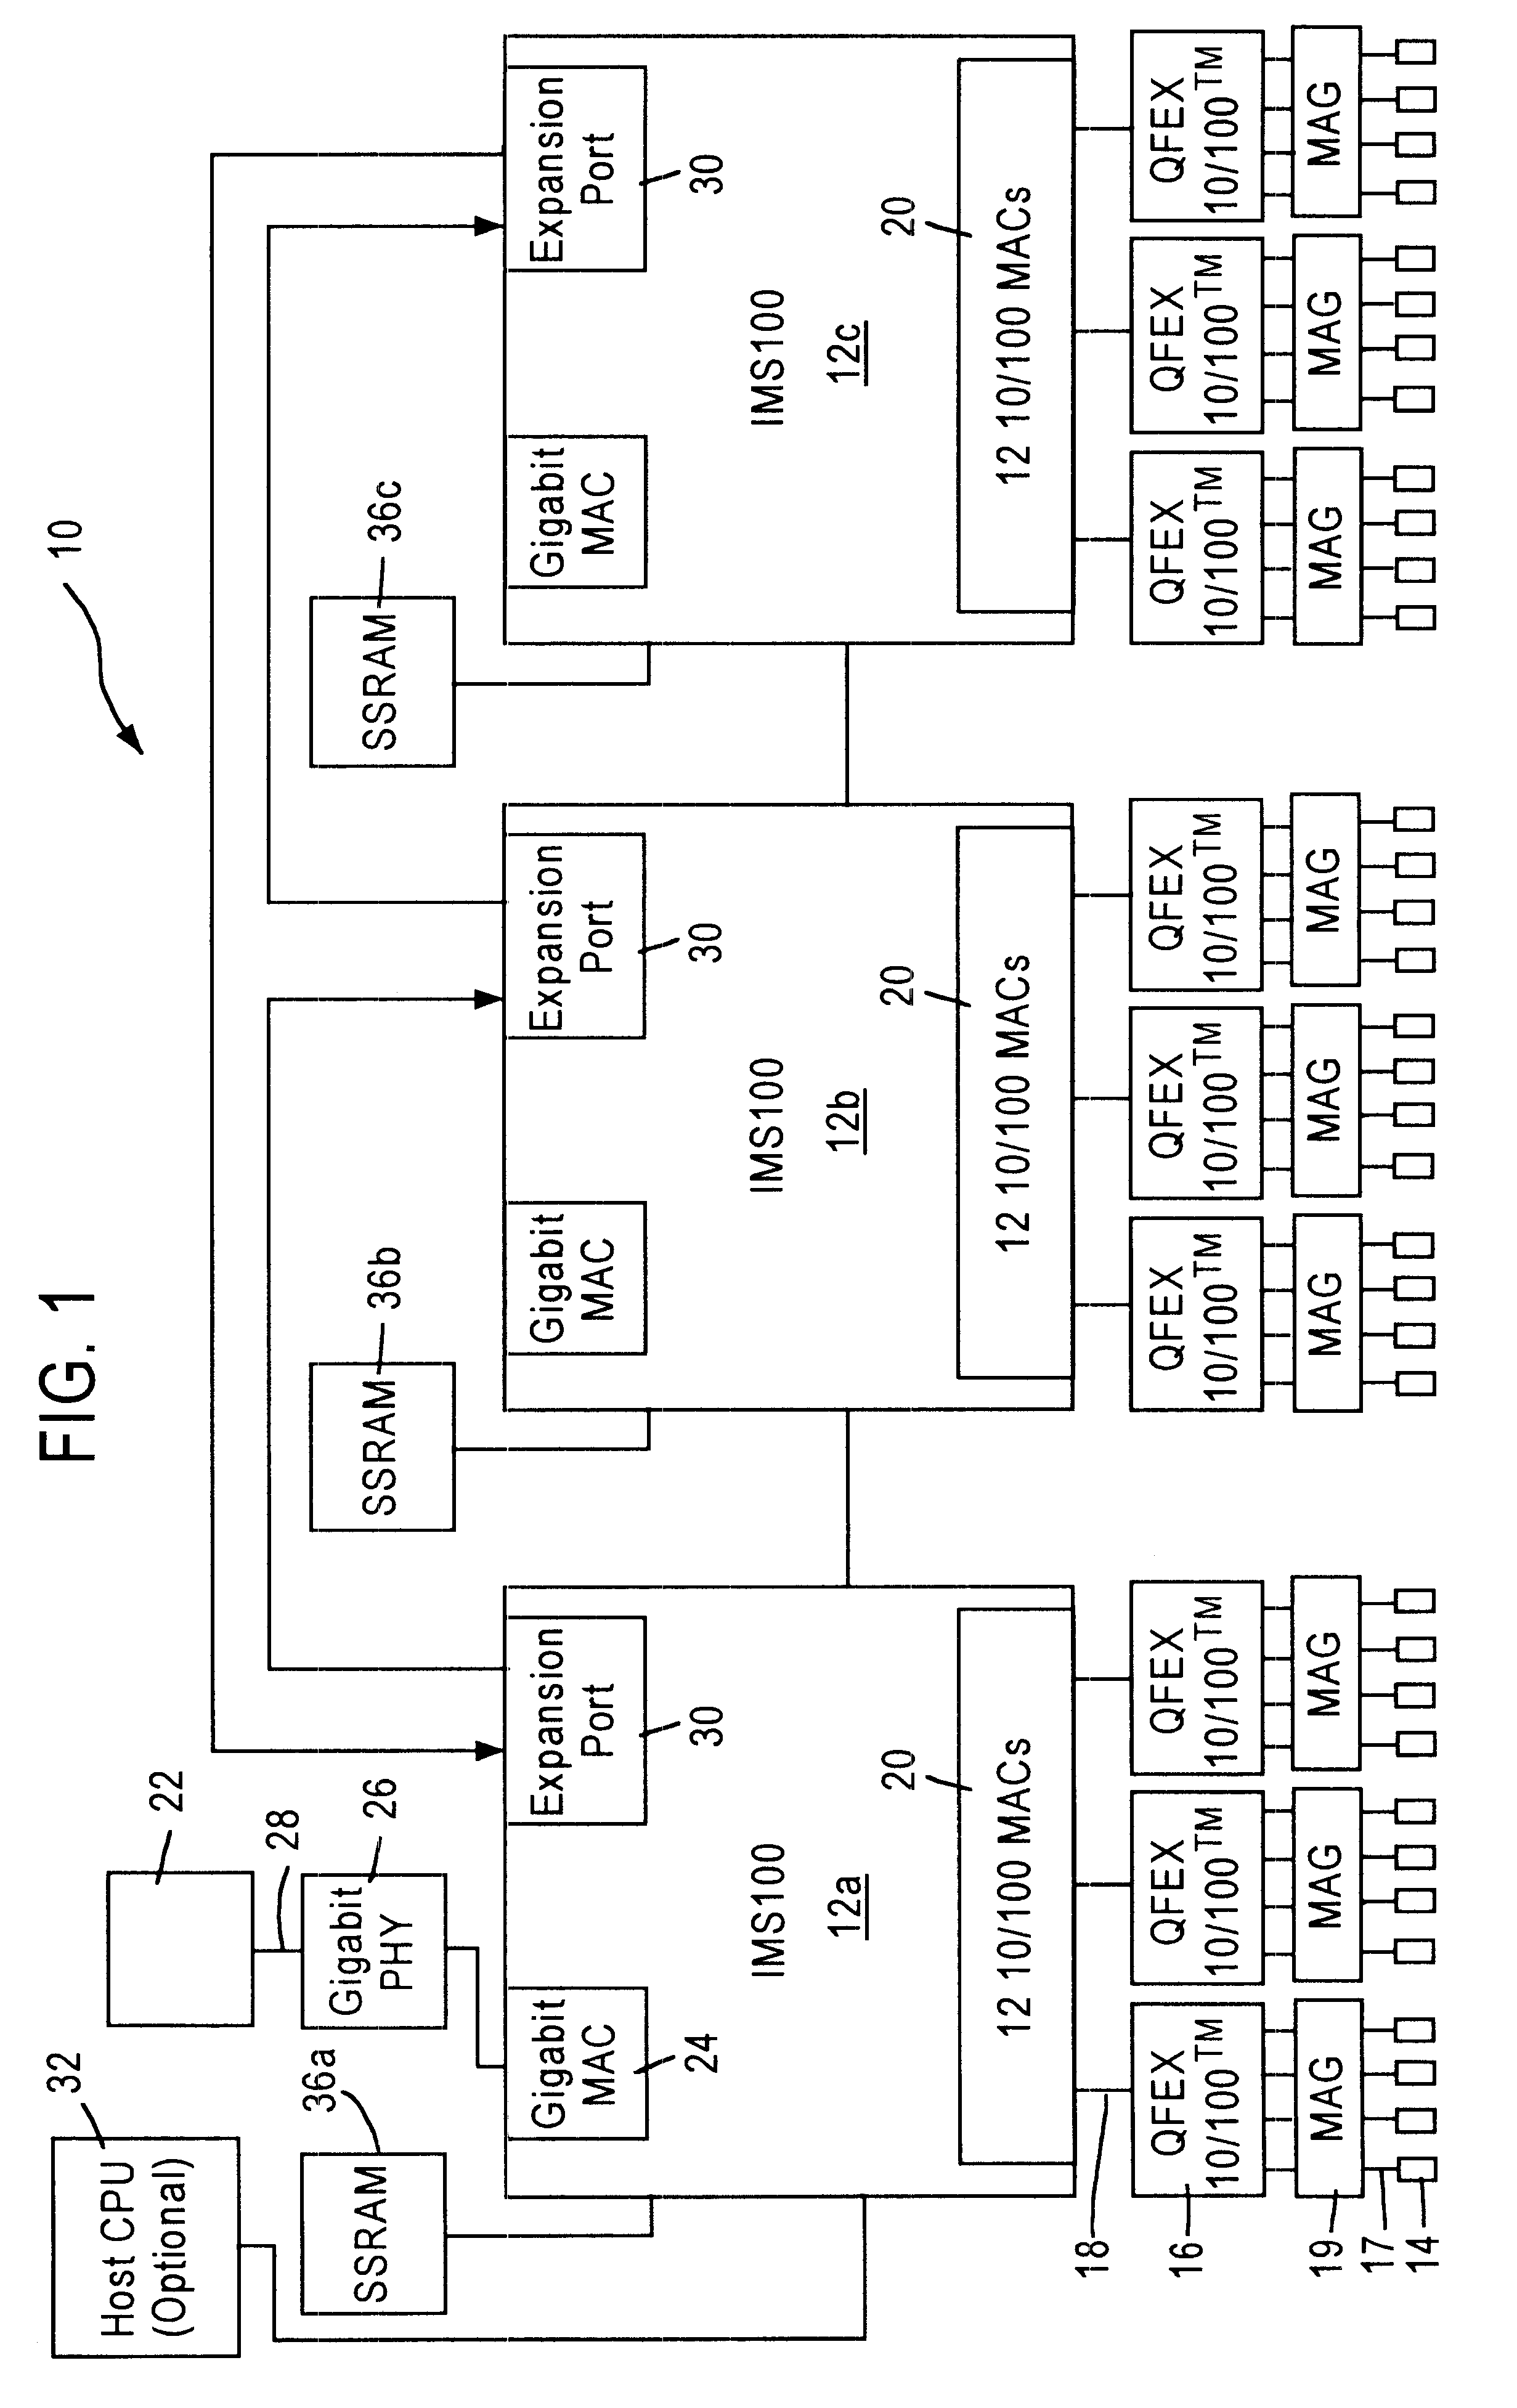 Method and apparatus for reclaiming buffers using a single buffer bit